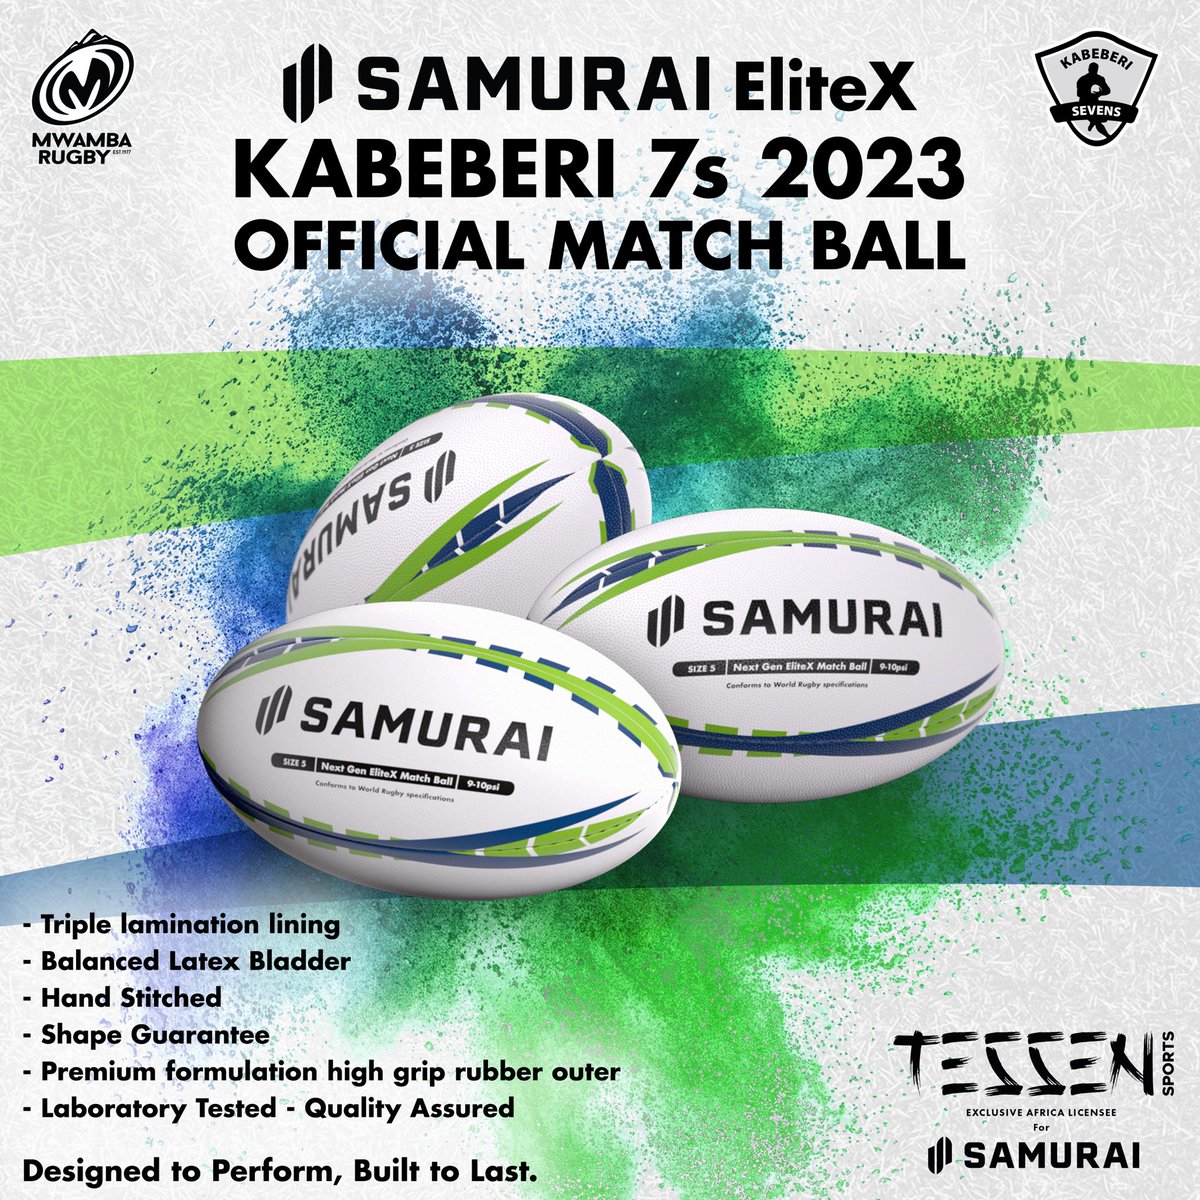 The Next Gen EliteX Match Ball – official ball for Kabeberi 7s 2023. 🏉 Get ready for some high-octane rugby action with a ball that meets World Rugby specifications and offers superior performance. #designedtoperform #builttolast #onlyfromtessen #affordablequality